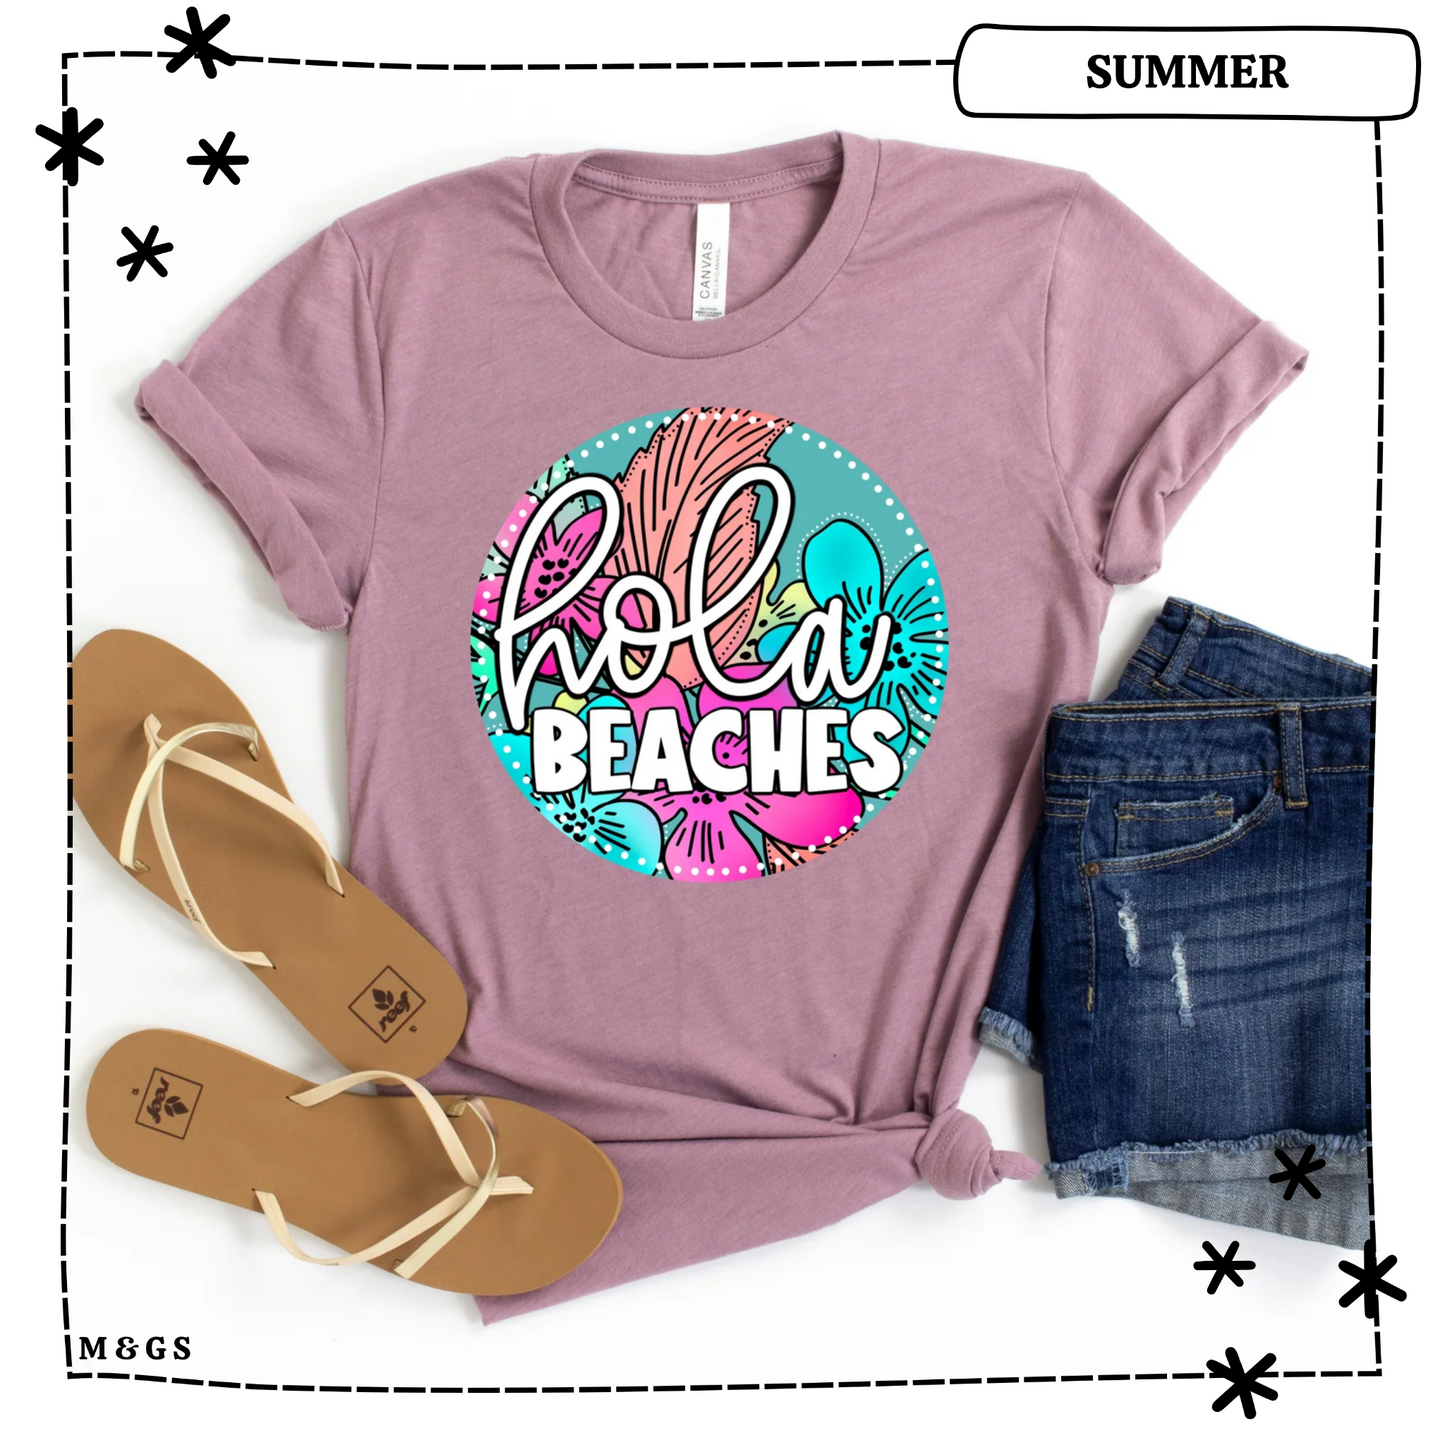 Hola Beaches with Floral Background